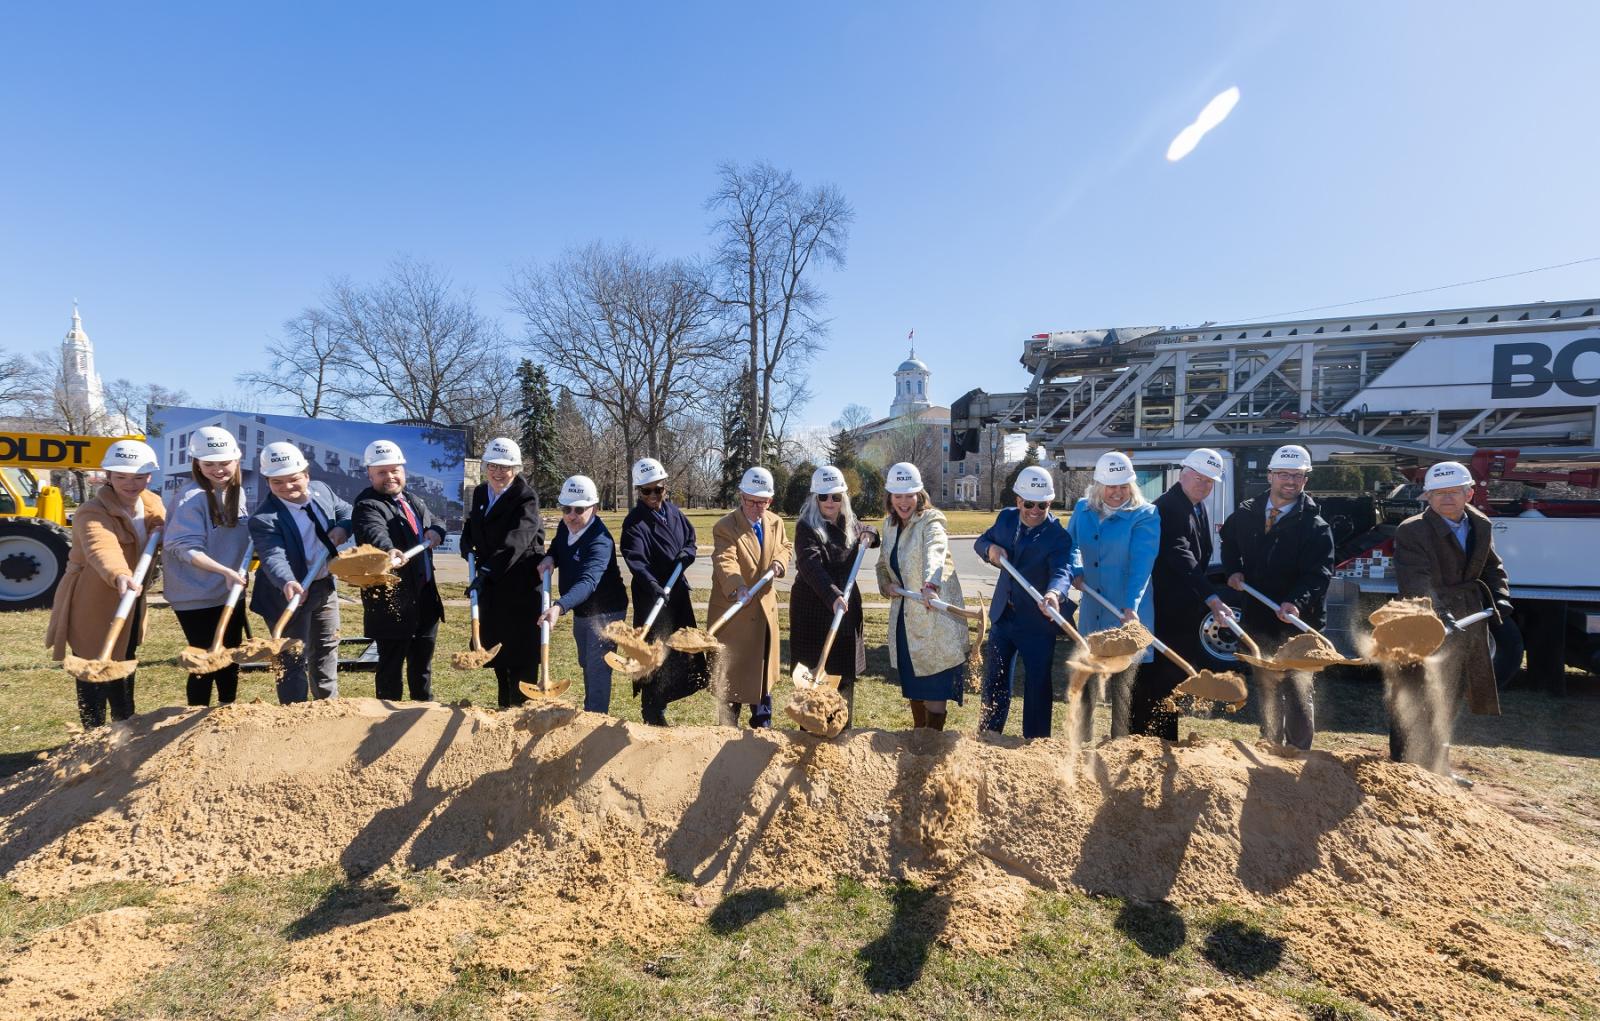 Lawrence University leaders and students are joined by Trout Museum of Art, Boldt, and community leaders in breaking ground for a new building in the 300 block of E. College Avenue.